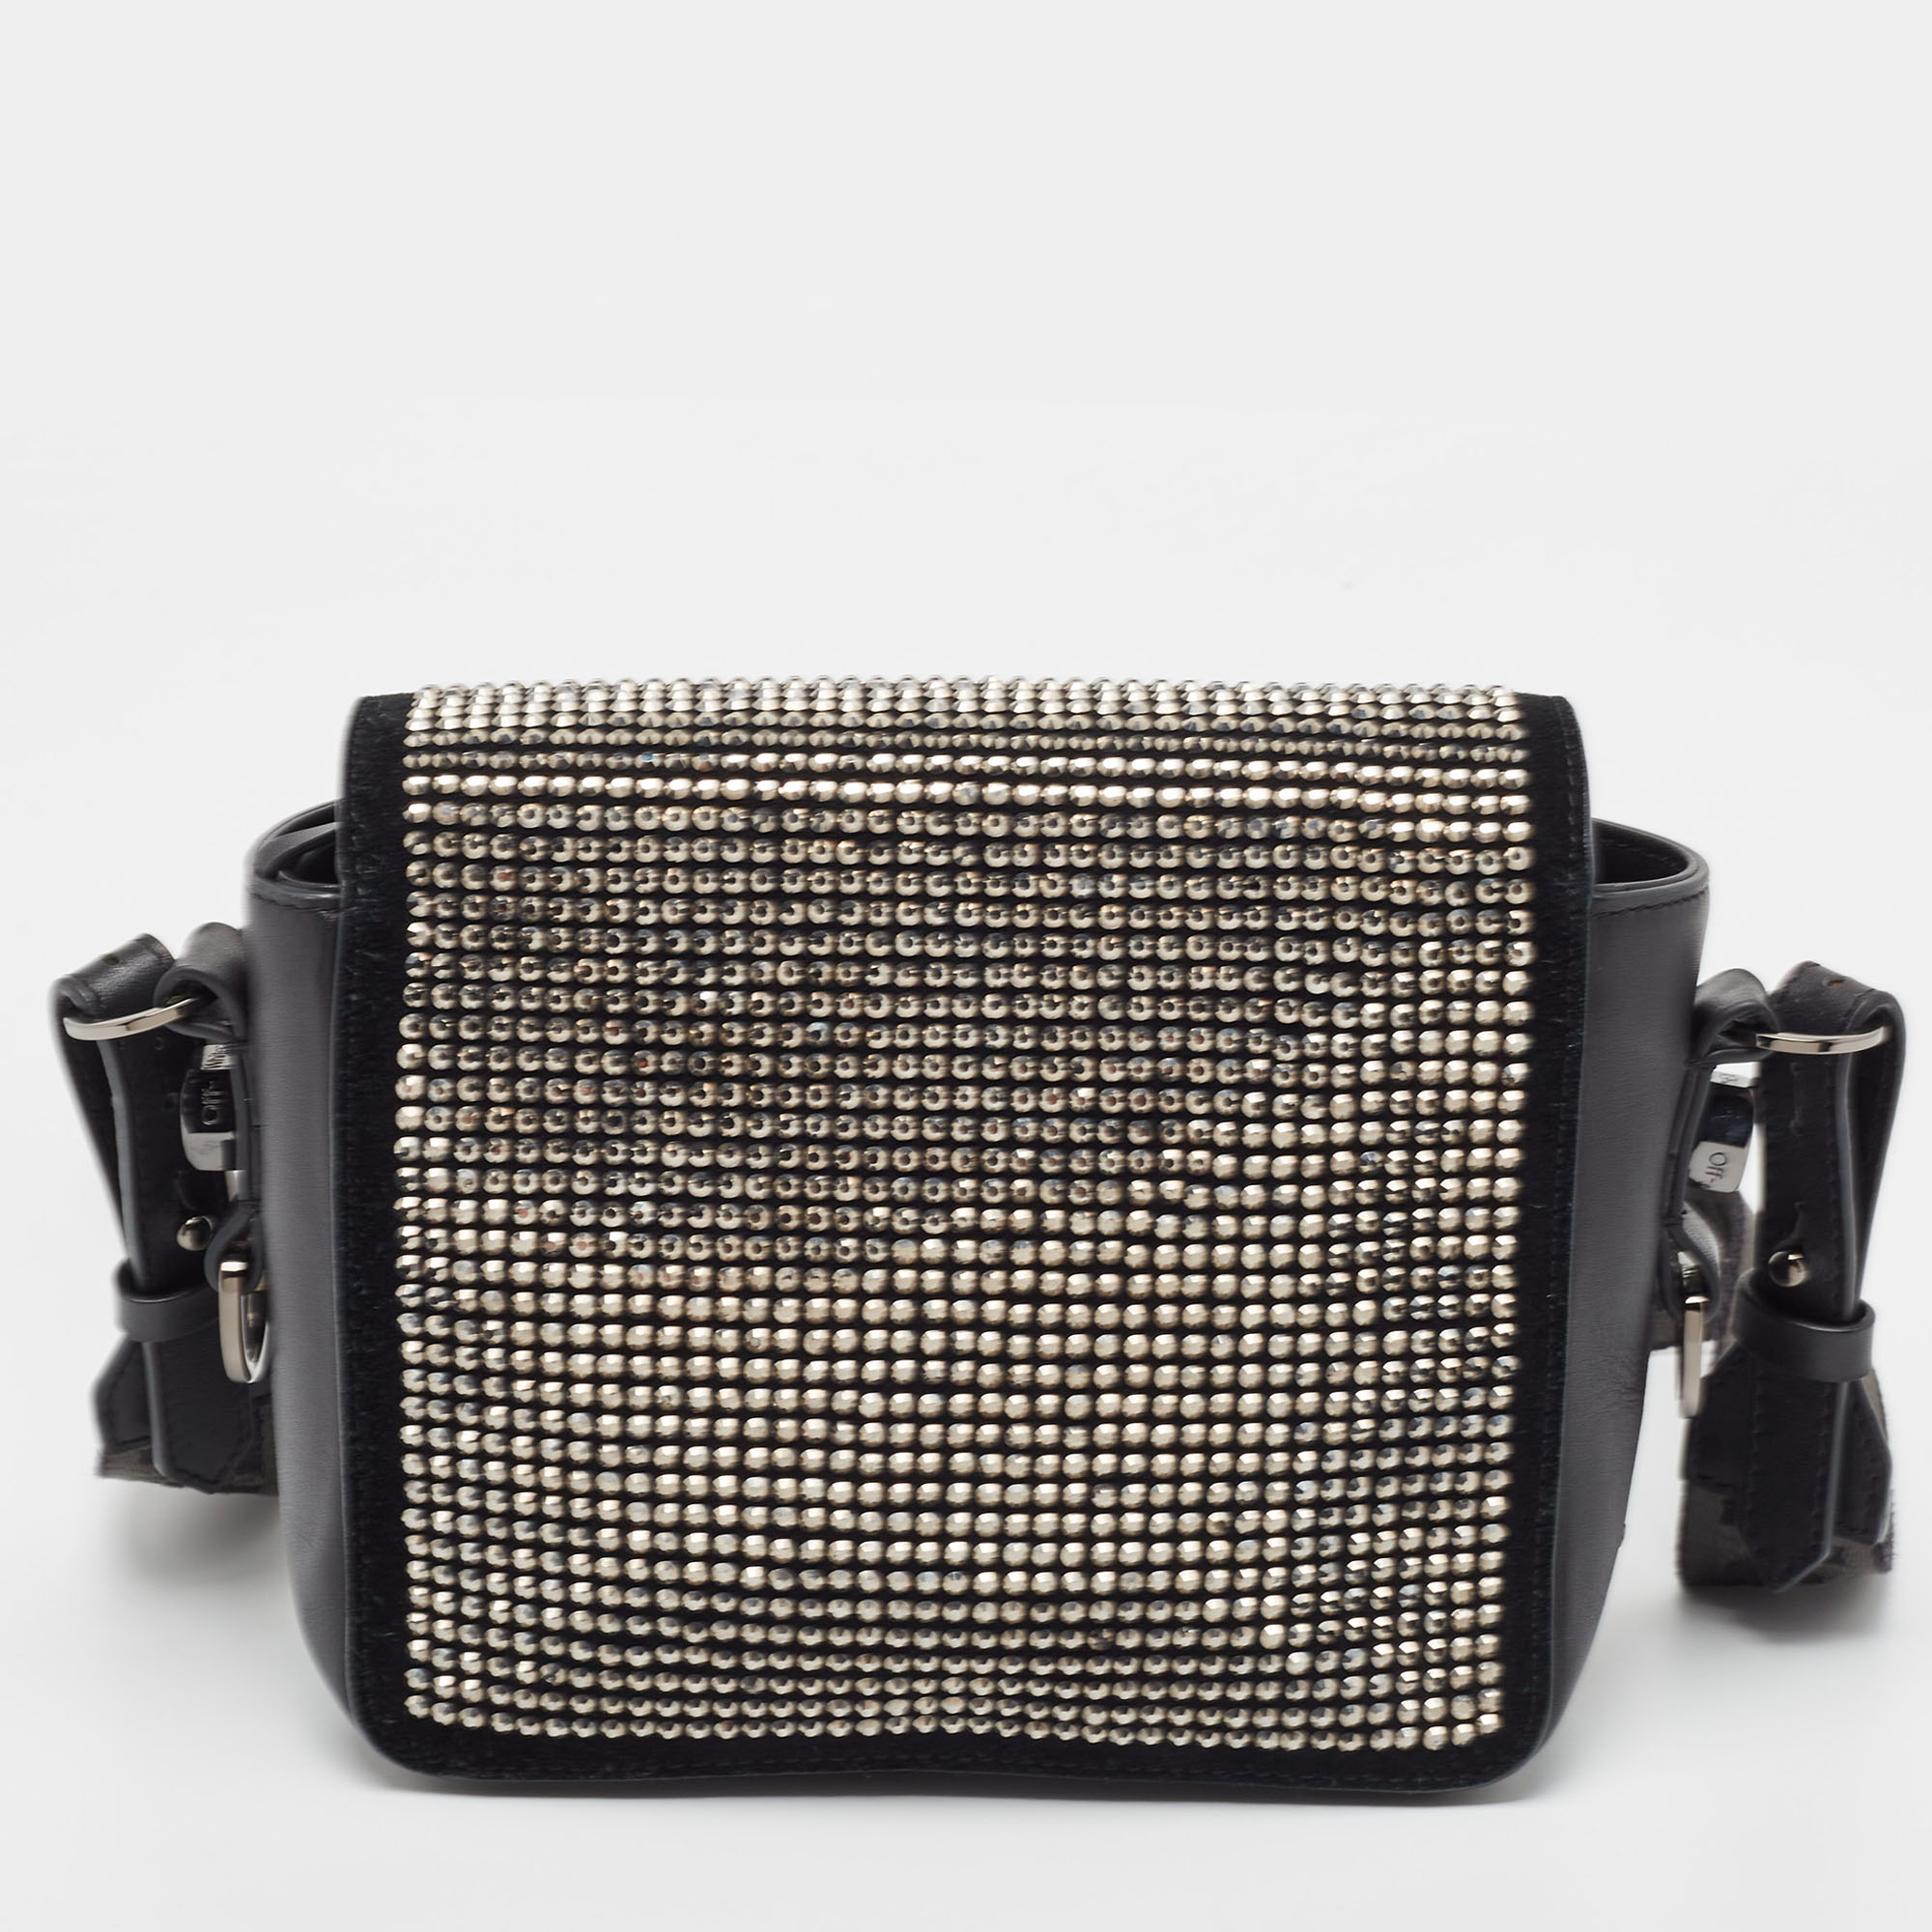 Off-White Black Leather And Suede Strass Binder Clip Crossbody Bag